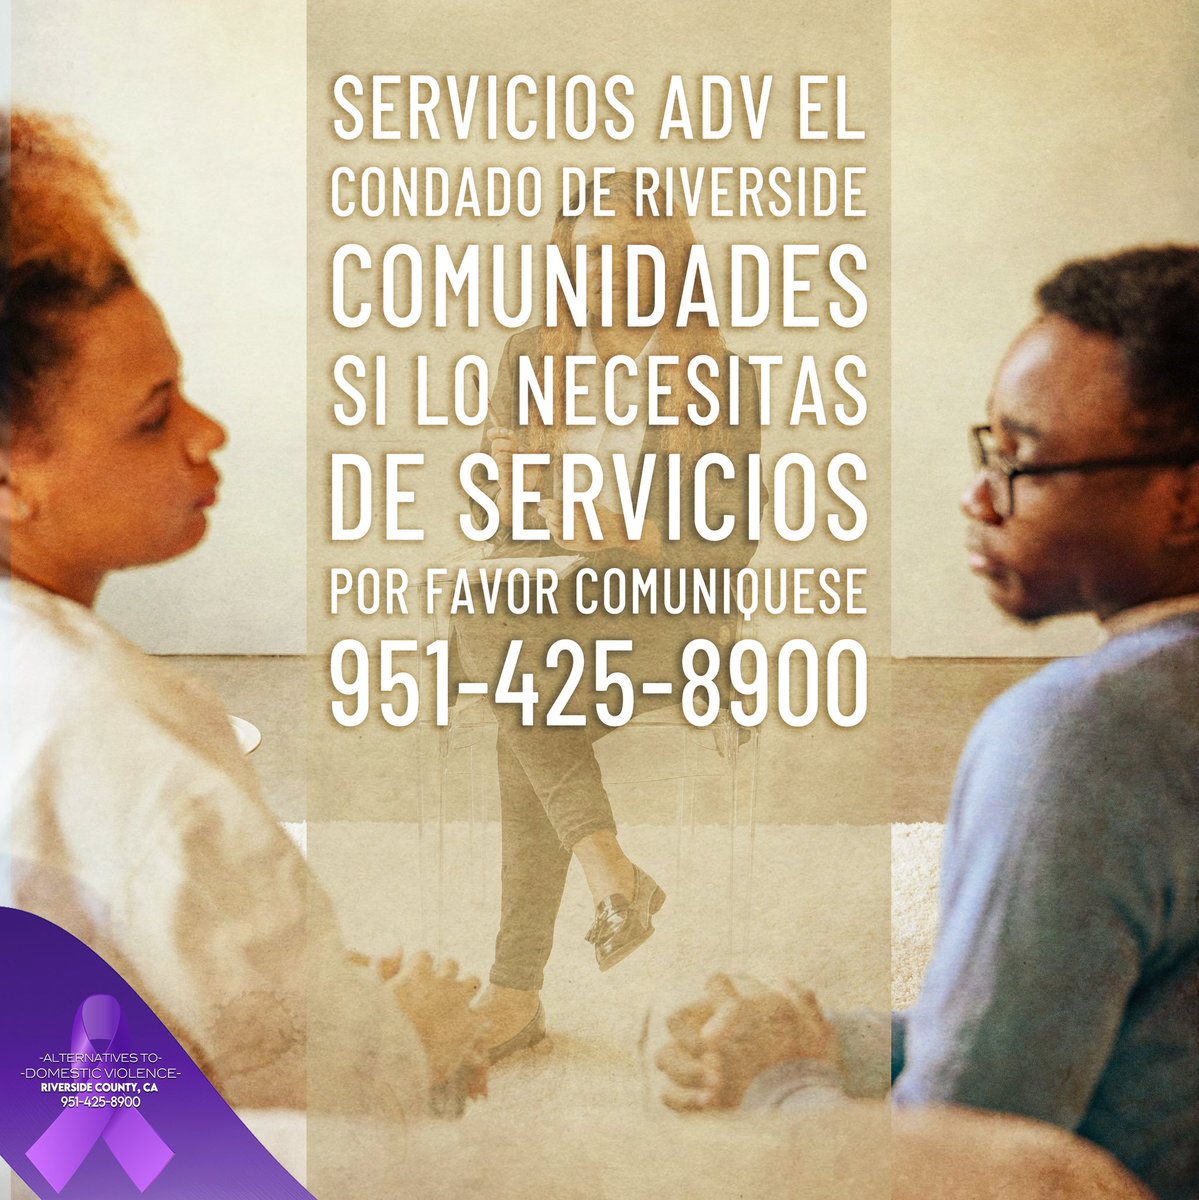 Freedom From Domestic Violence and Abuse is Within Reach. 
Call ADV!
1-800-339-7233
alternativestodomesticviolence.org

#domesticabuse #domesticviolence 
#Riversidecalifornia #riversidecounty
#espanol